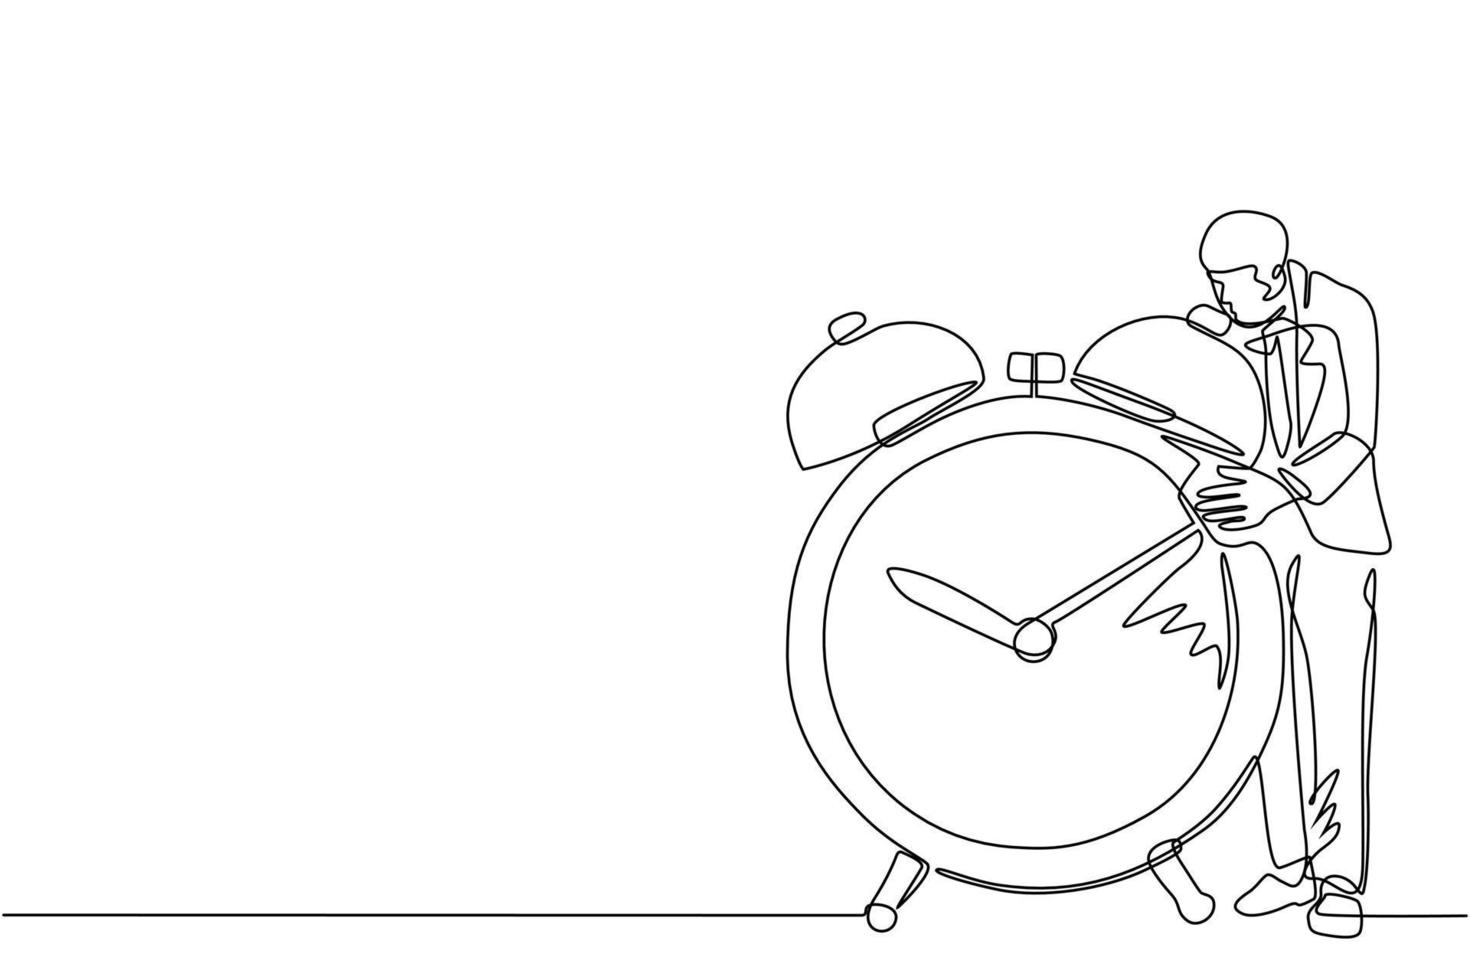 Single one line drawing businessman, manager or employee standing and hugging big clock. Concept of time management. Time, watch, time to work. Continuous line draw design graphic vector illustration